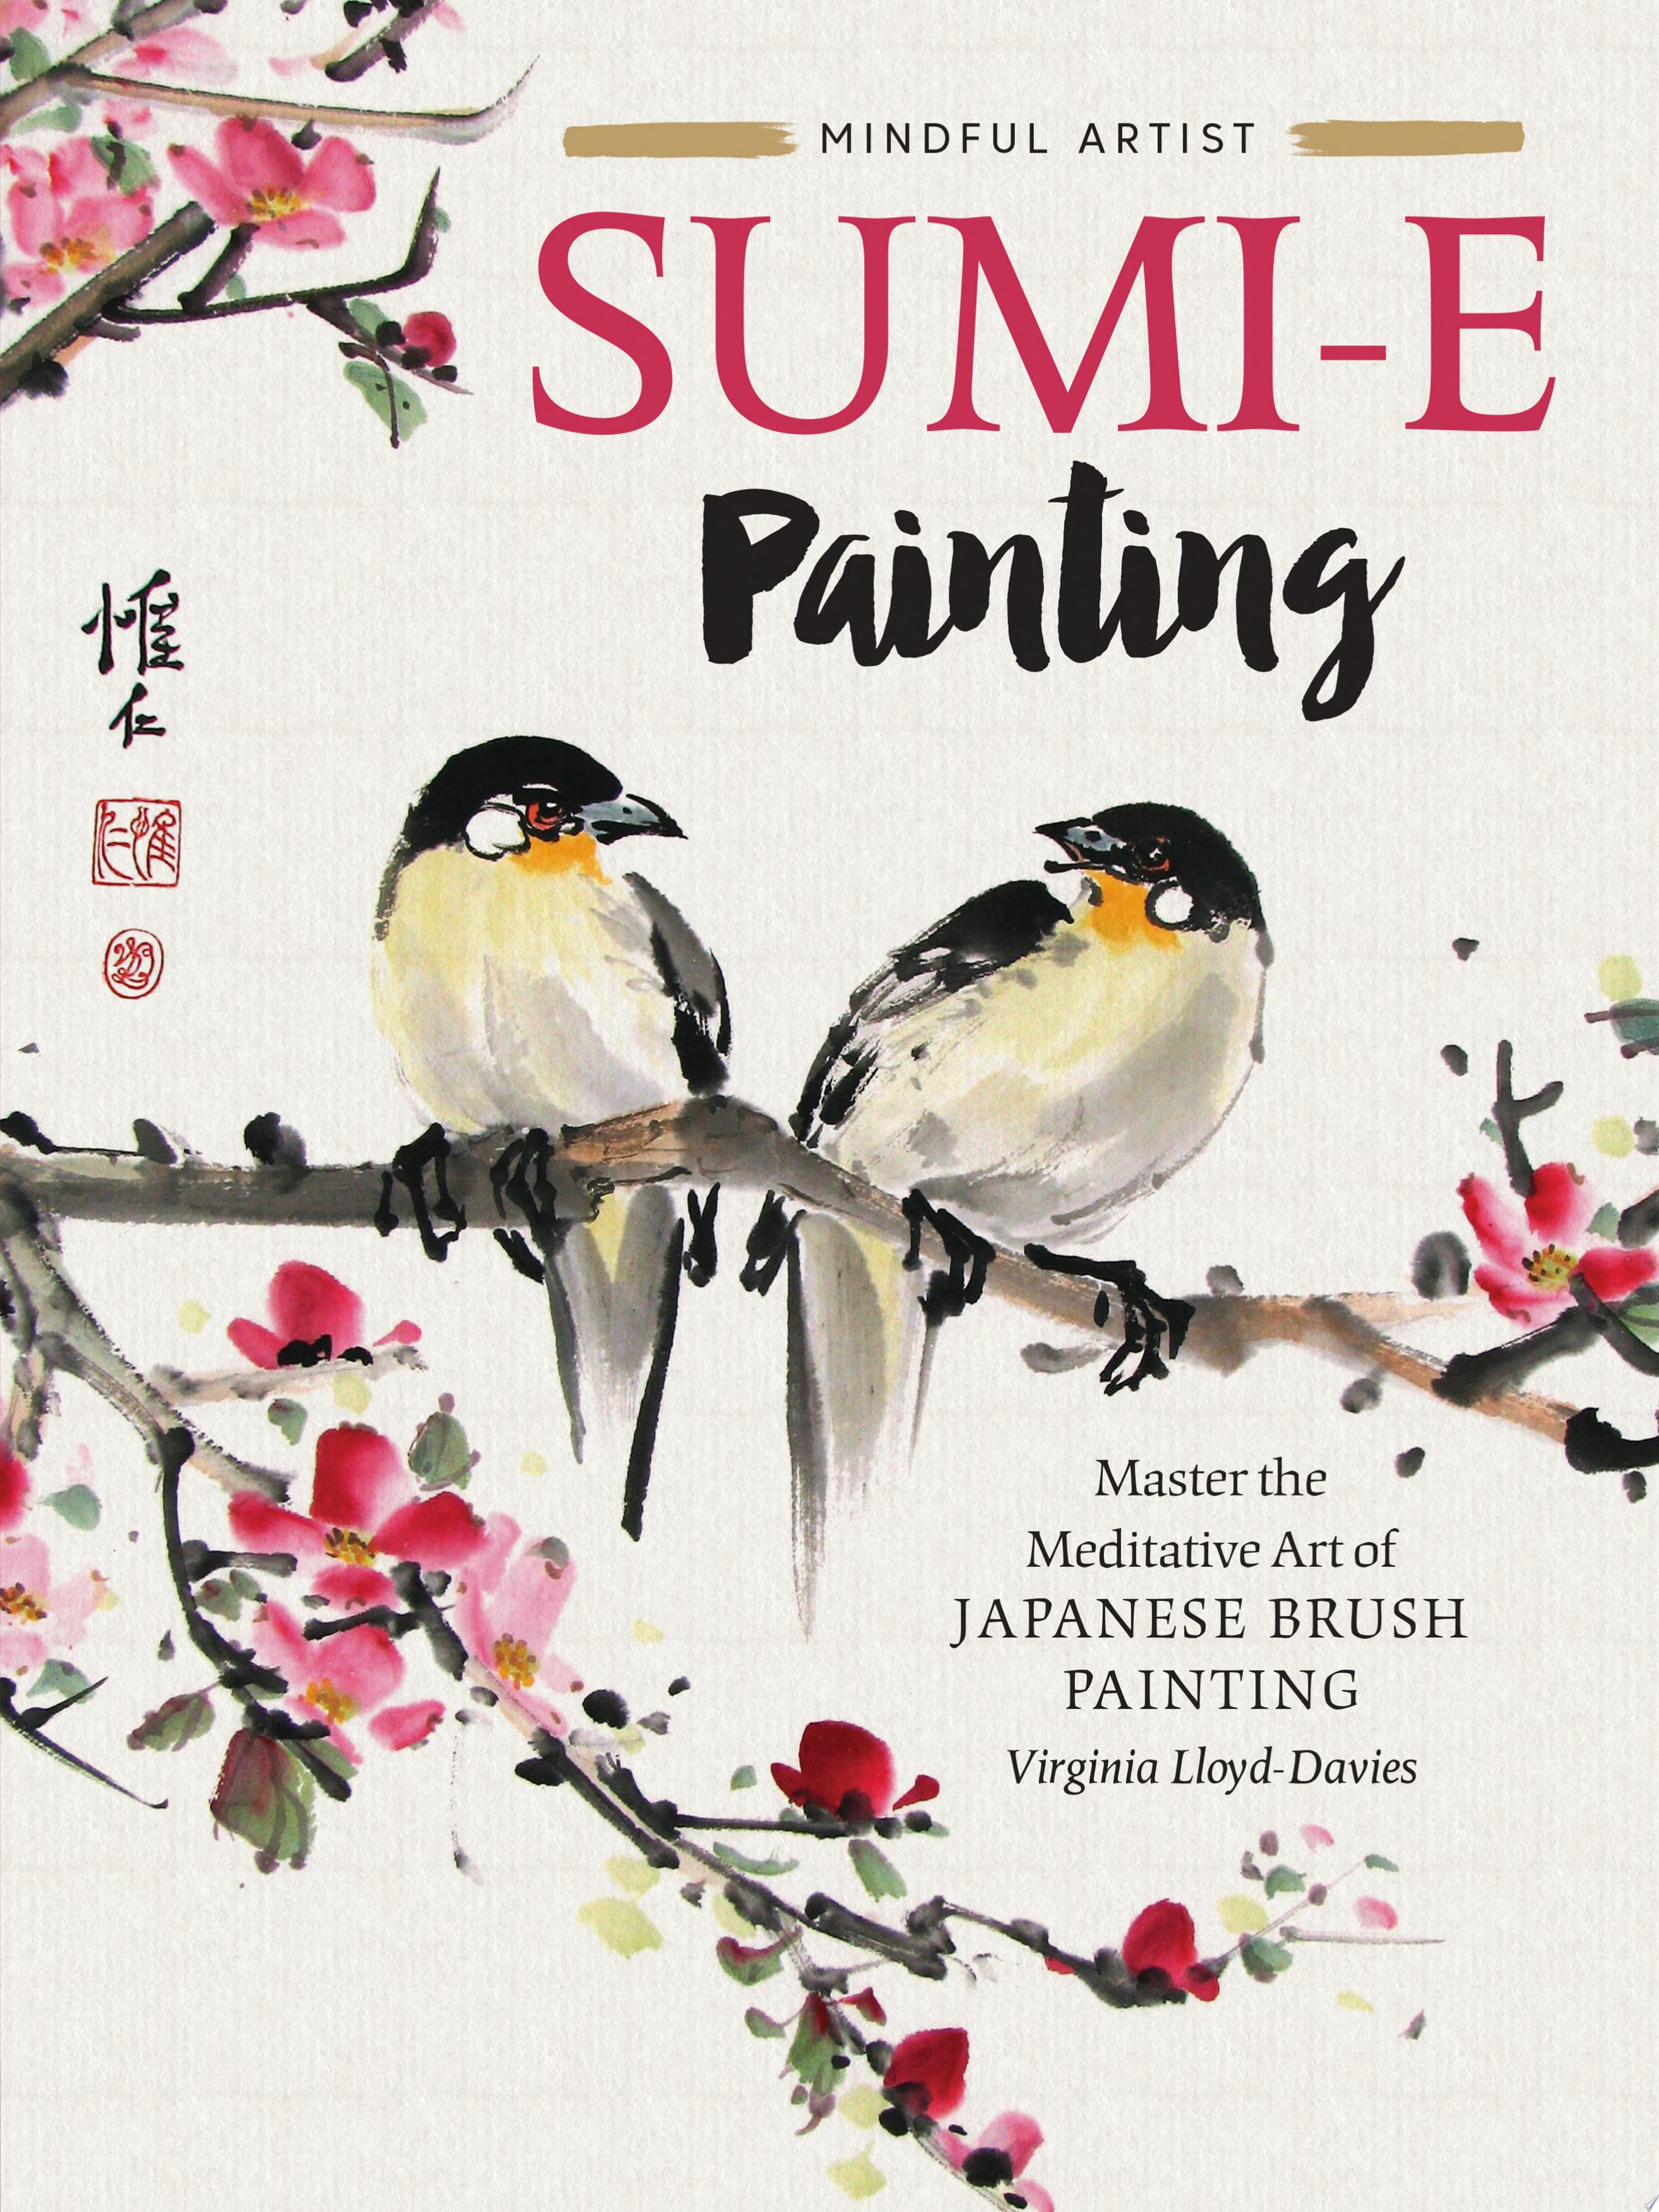 Image for "Mindful Artist: Sumi-e Painting"